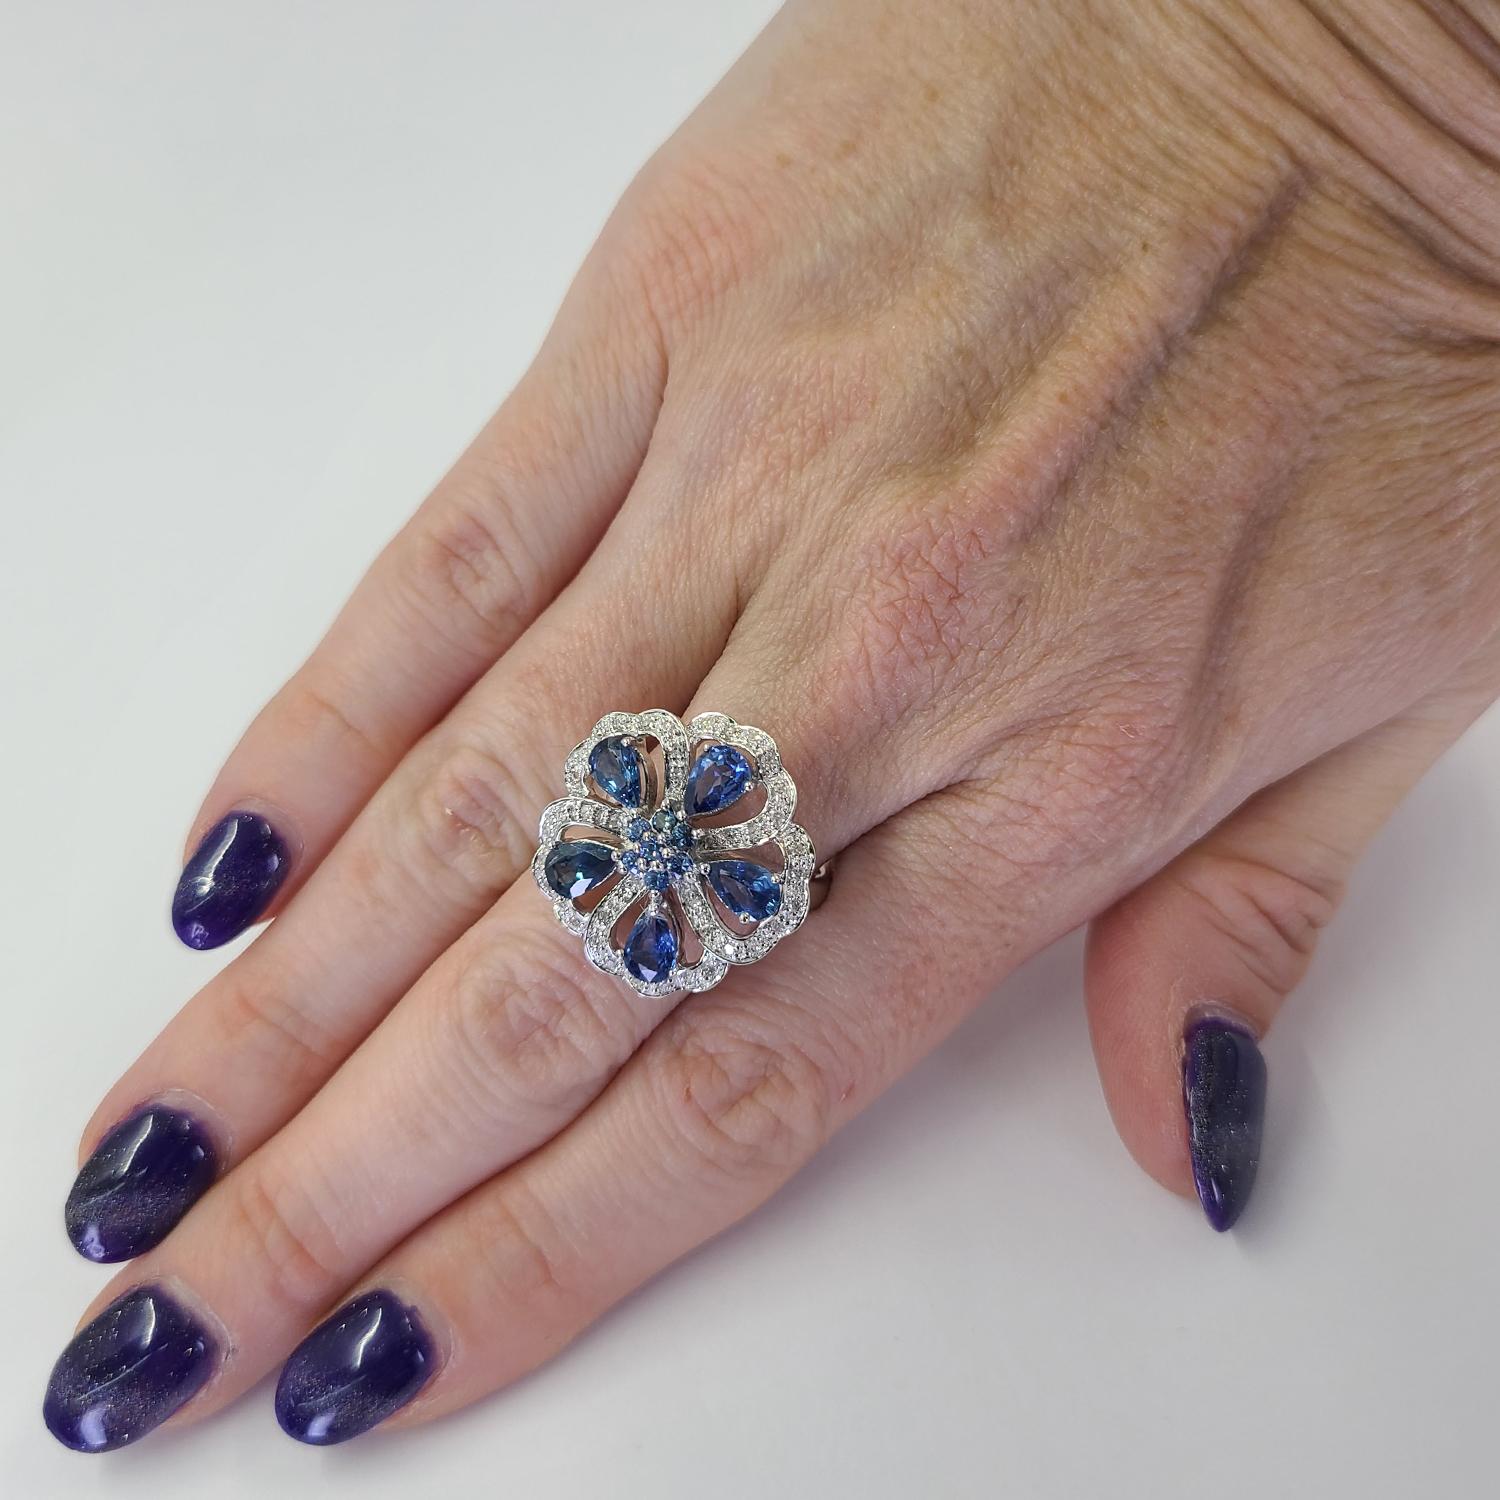 Elegant 14 Karat White Gold Flower Ring with 3 Dimensional Openwork Design. Featuring 5 Pear Cut Sapphires and 7 Round Sapphires Totaling Approximately 2.00 Carats Accented By 40 Single Cut Diamonds of SI Clarity and H/I Color Totaling 0.20 Carats.